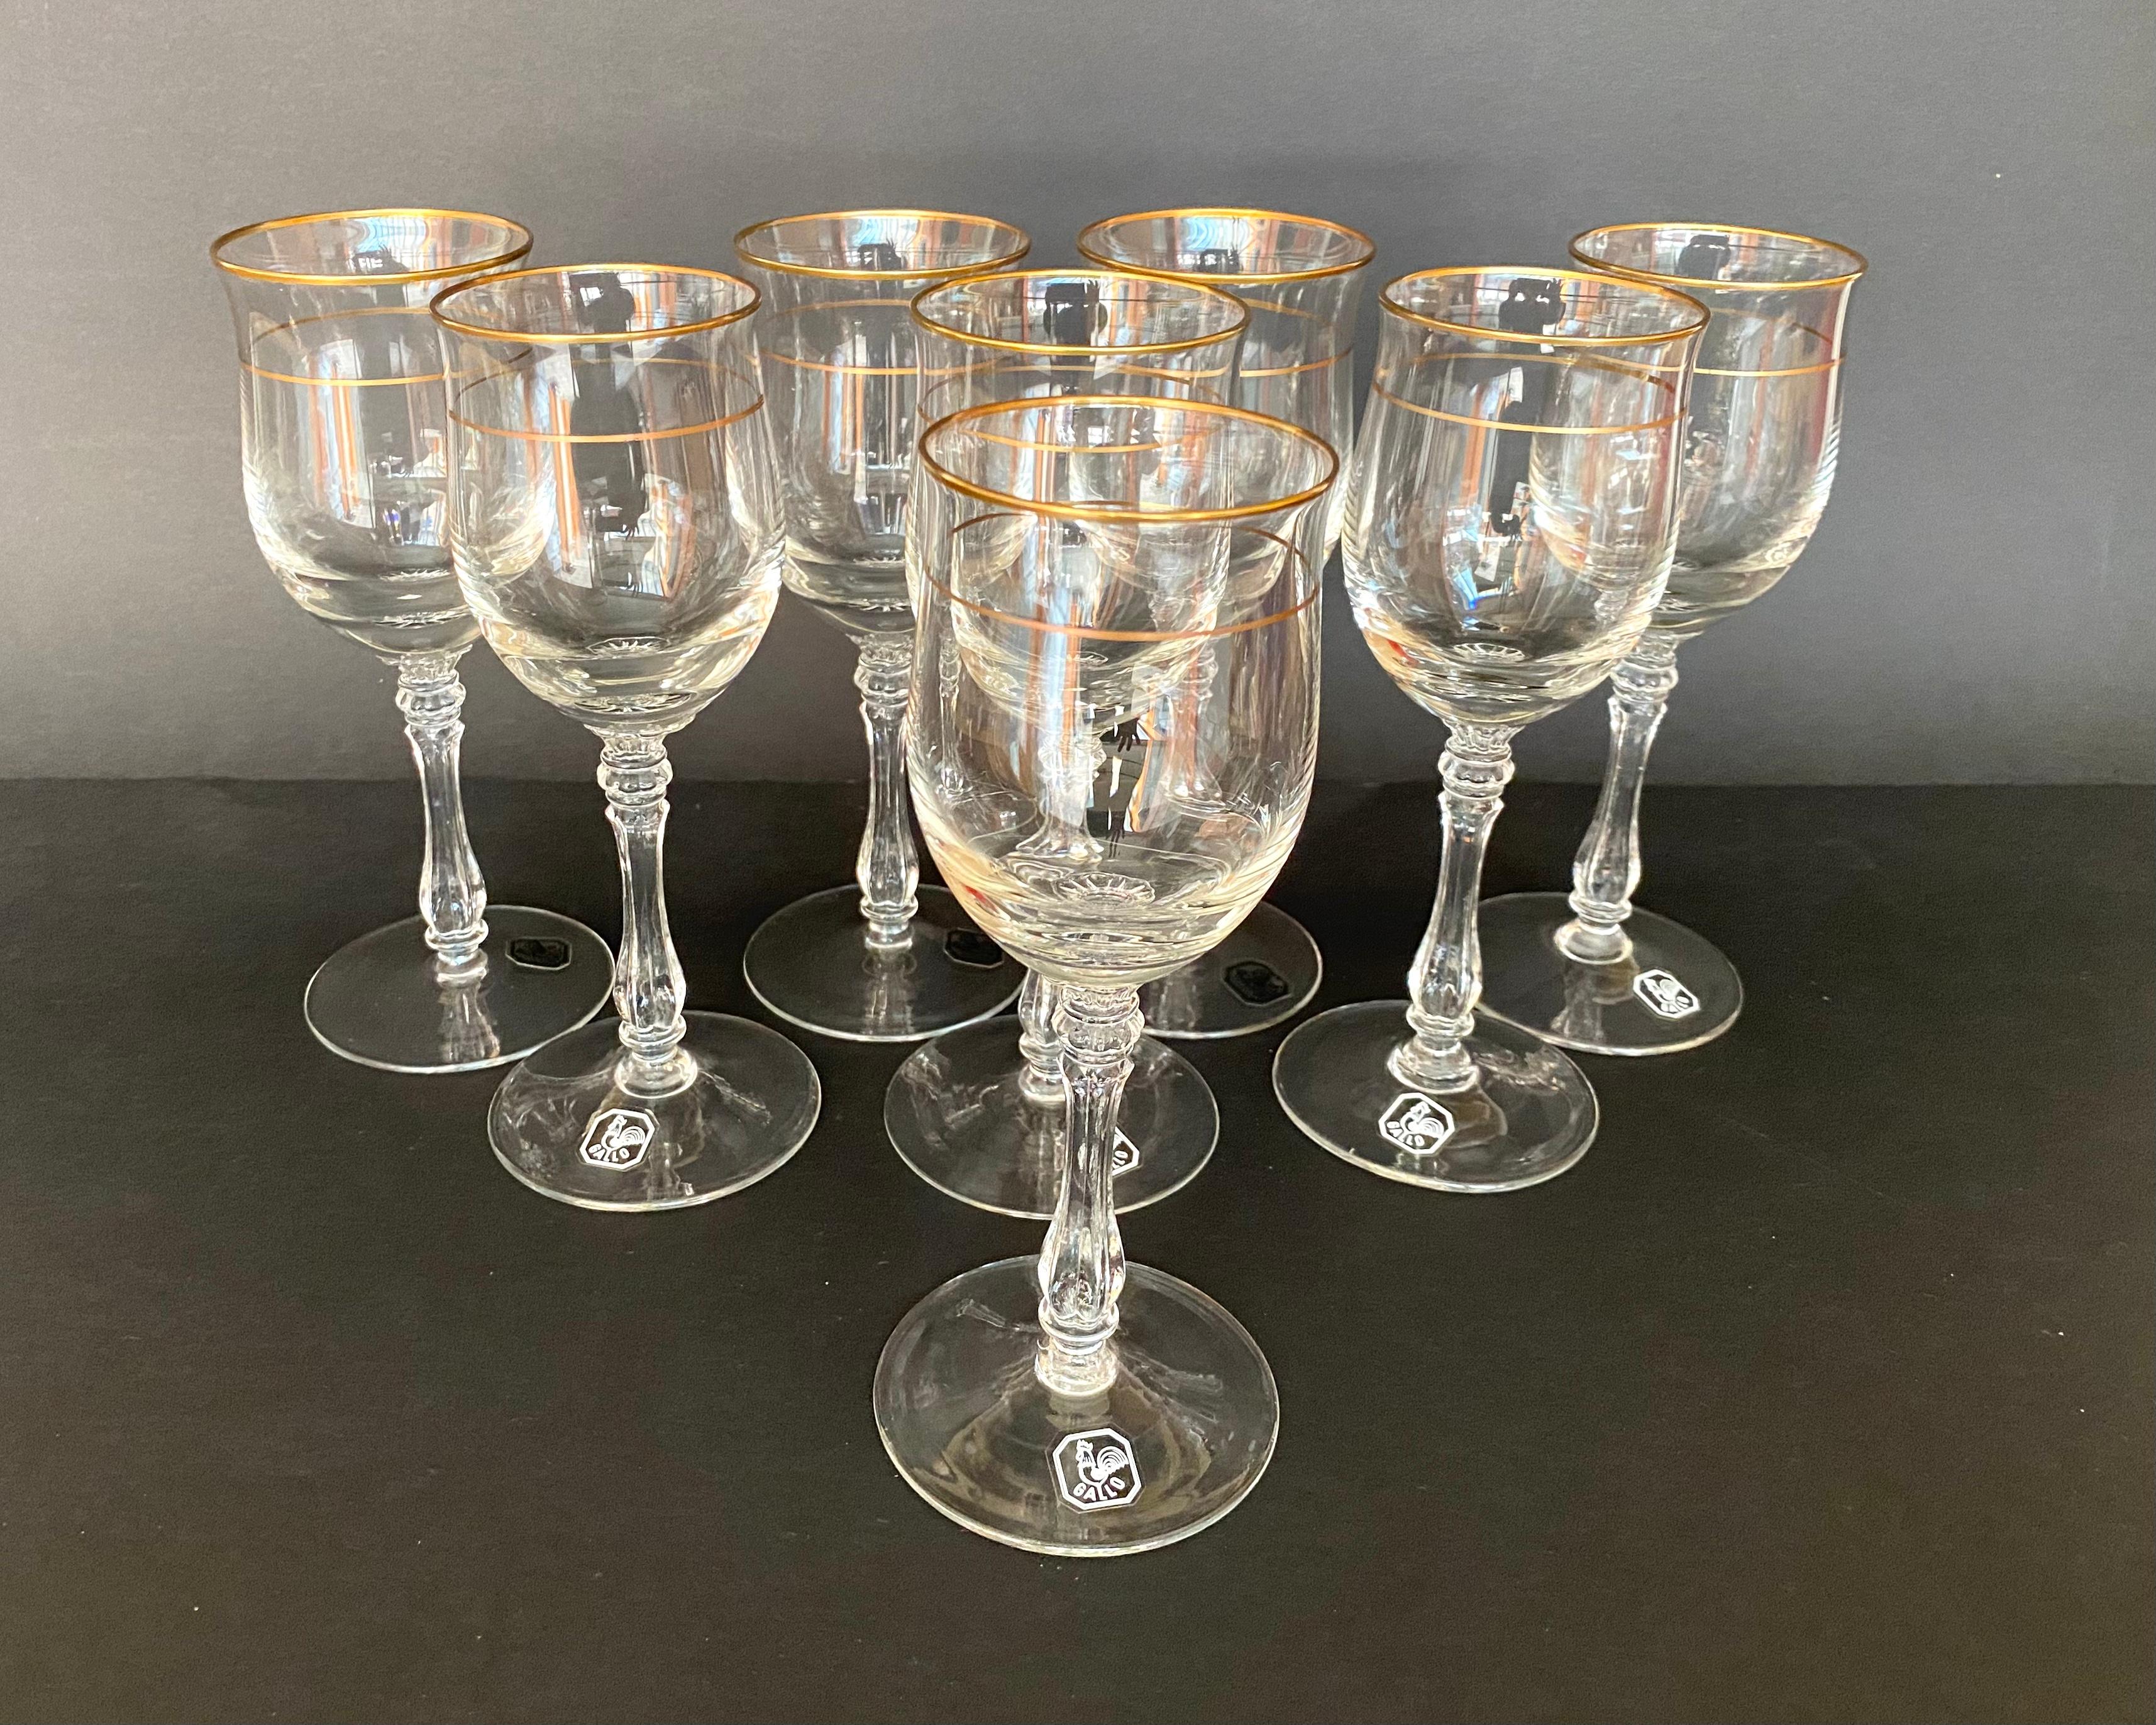 Late 20th Century Crystal Wine Glasses by Gallo Set 8 Crystal Wine Glasses, 1980 For Sale